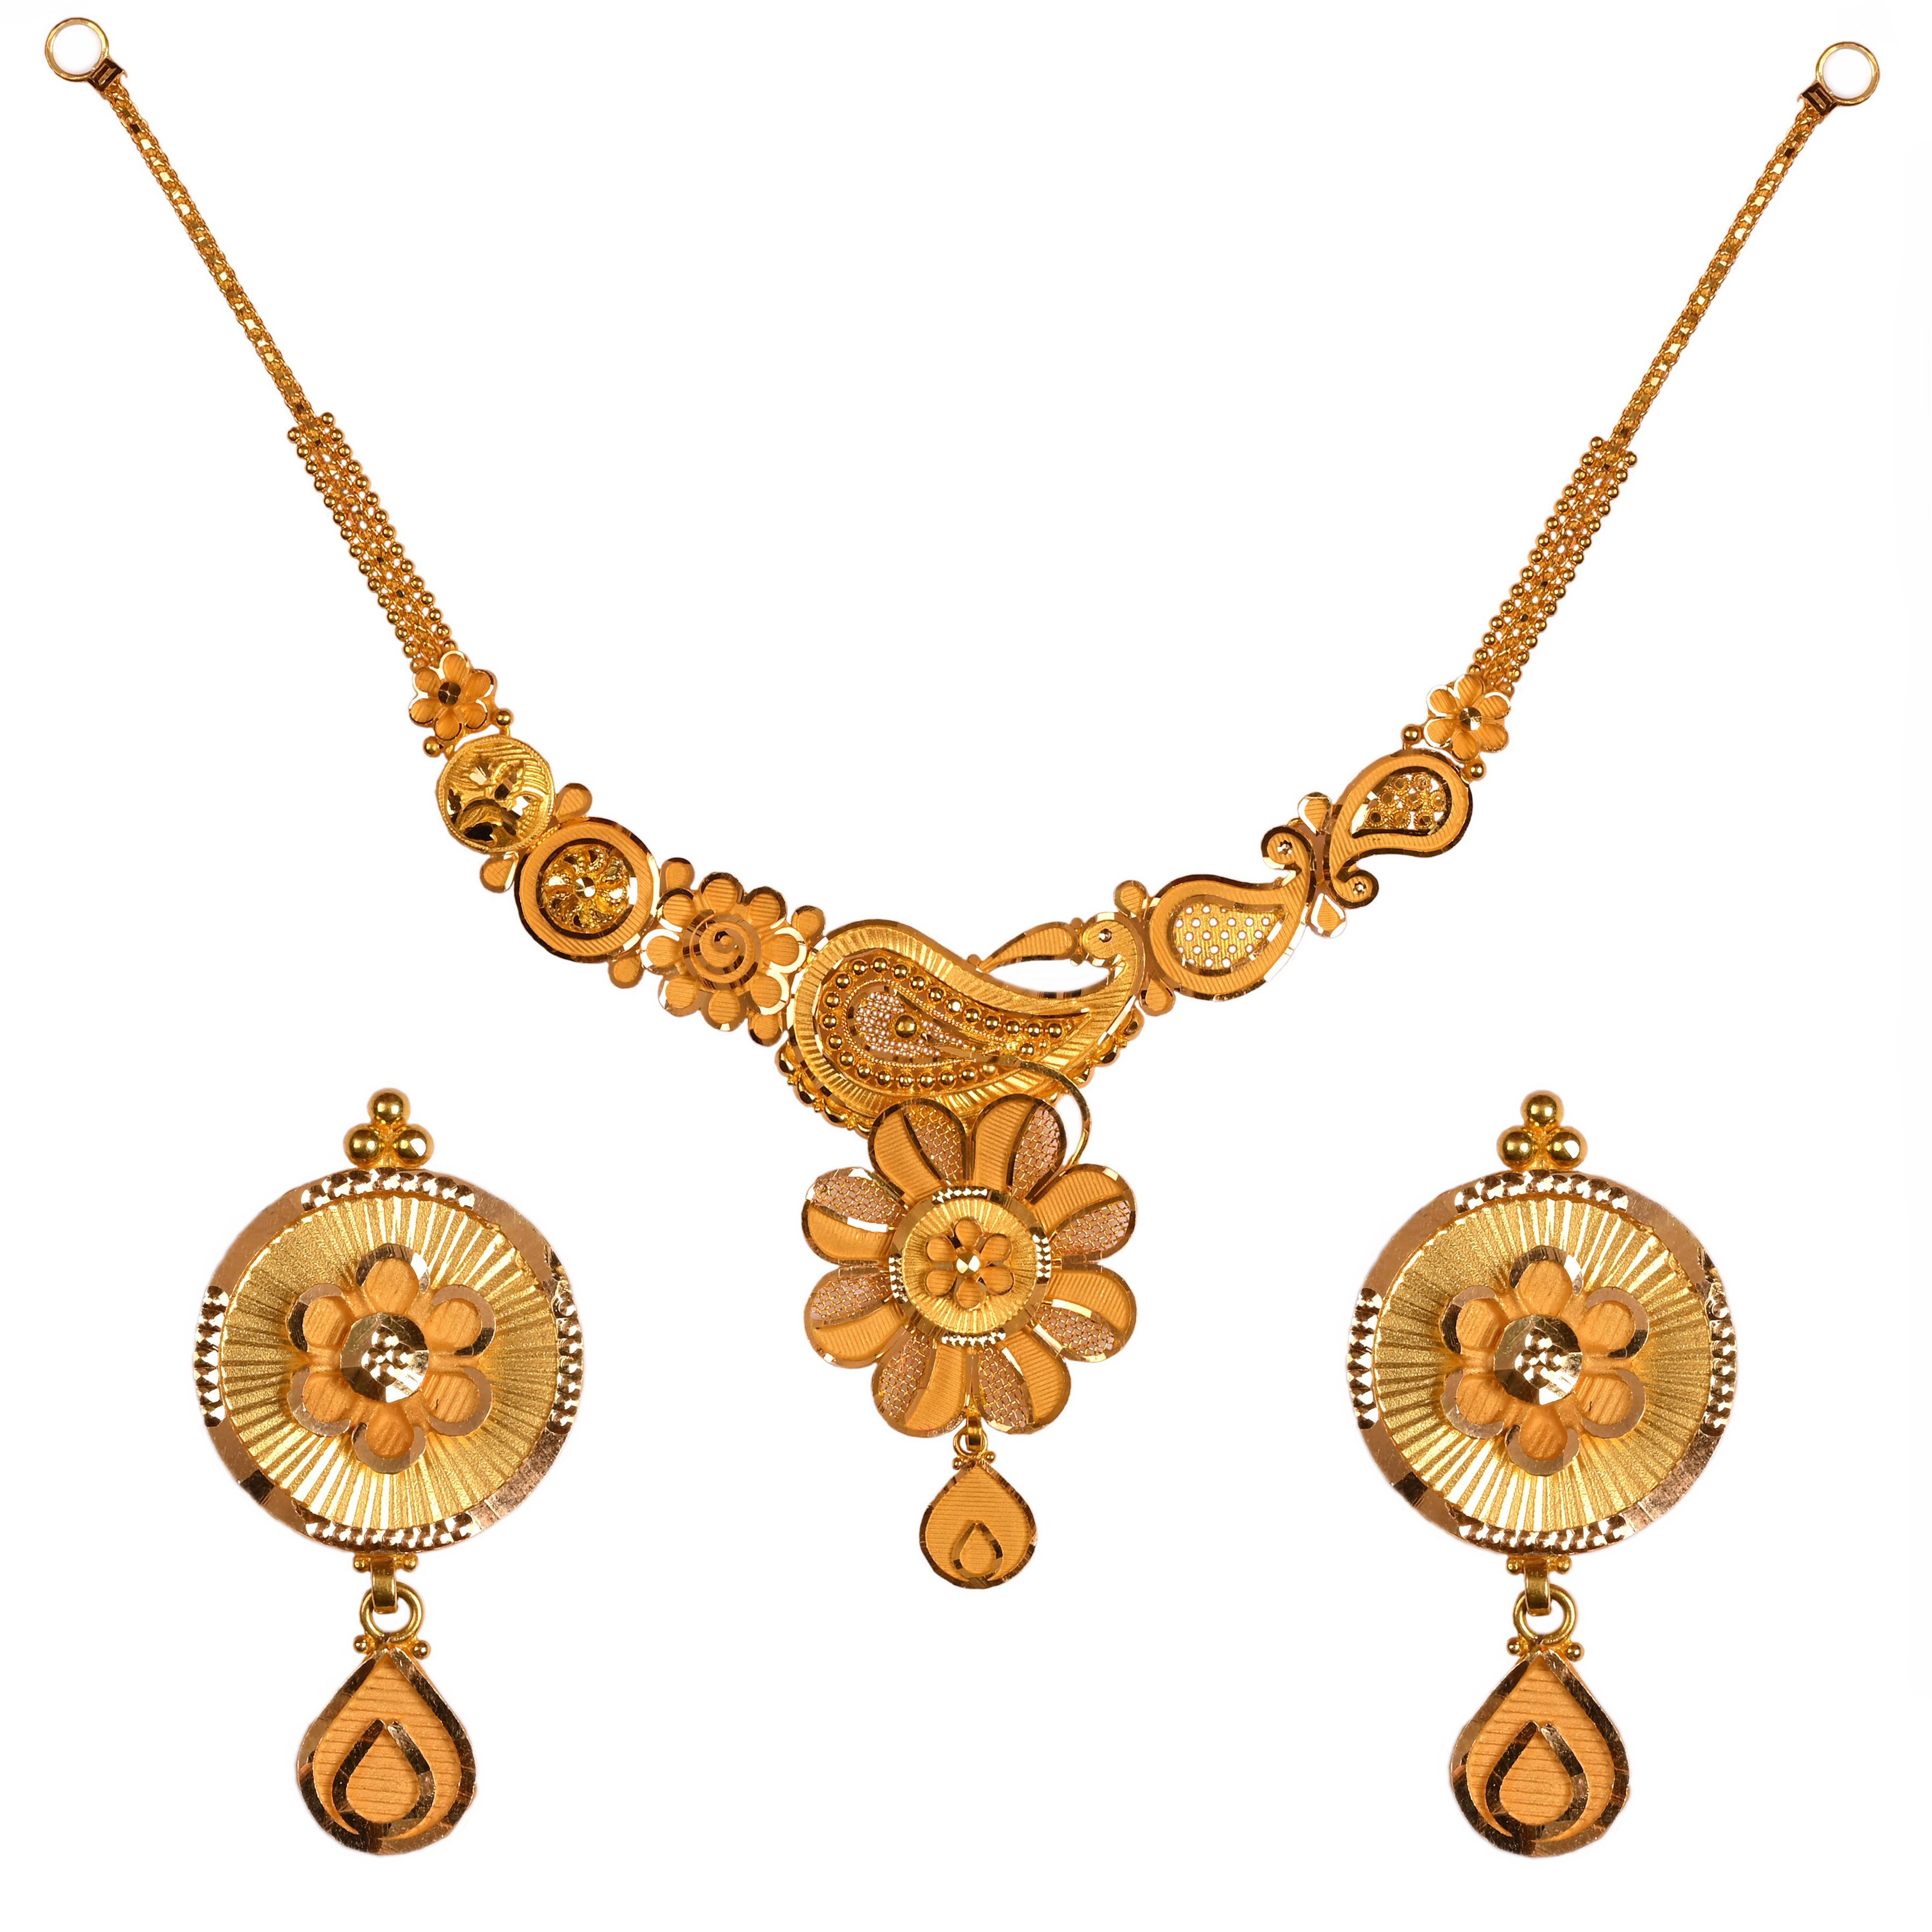 Beautiful Chitrathi Nivara Lappa Gold Necklace for women under 35K -  Candere by Kalyan Jewellers